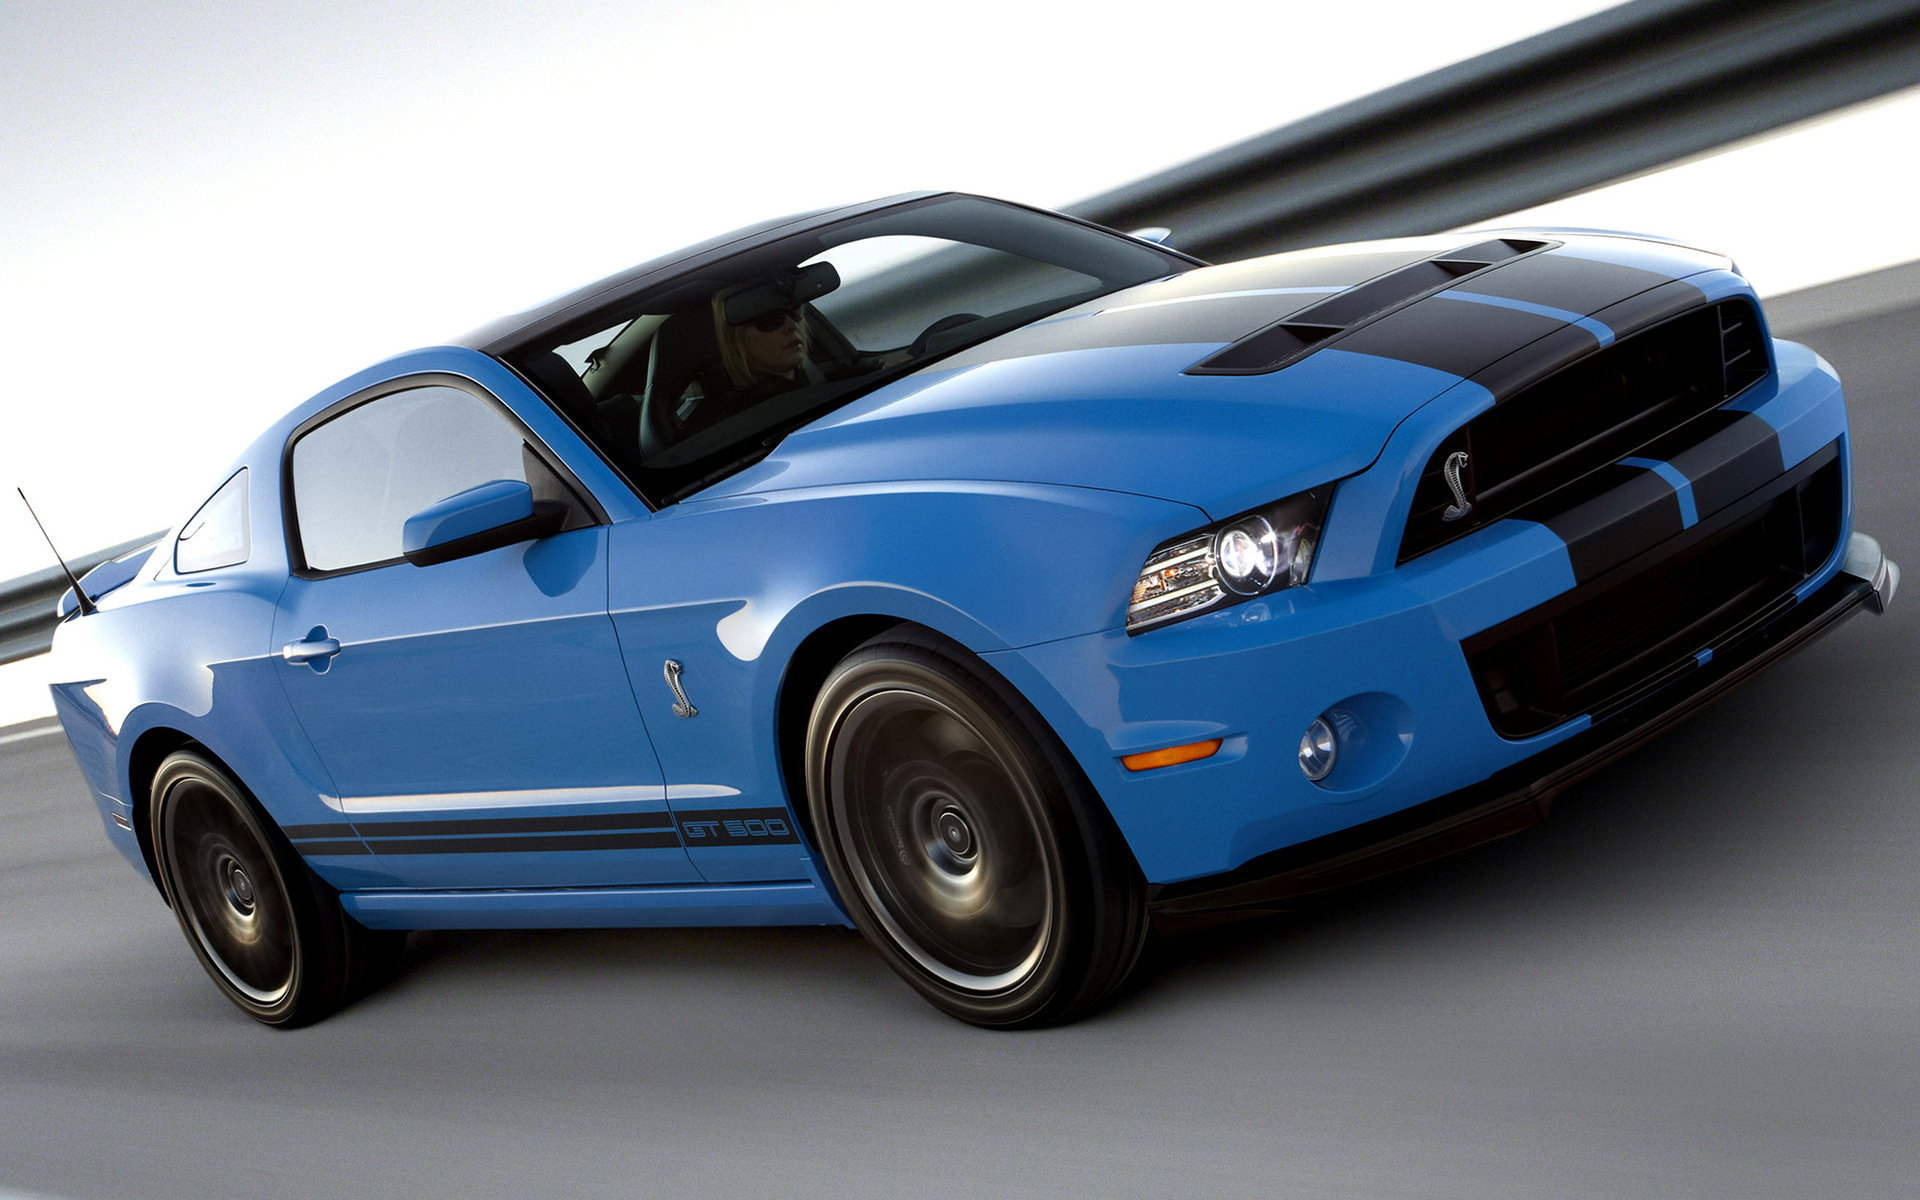 Ford Mustang Shelby Gt500 Svt Wallpapers